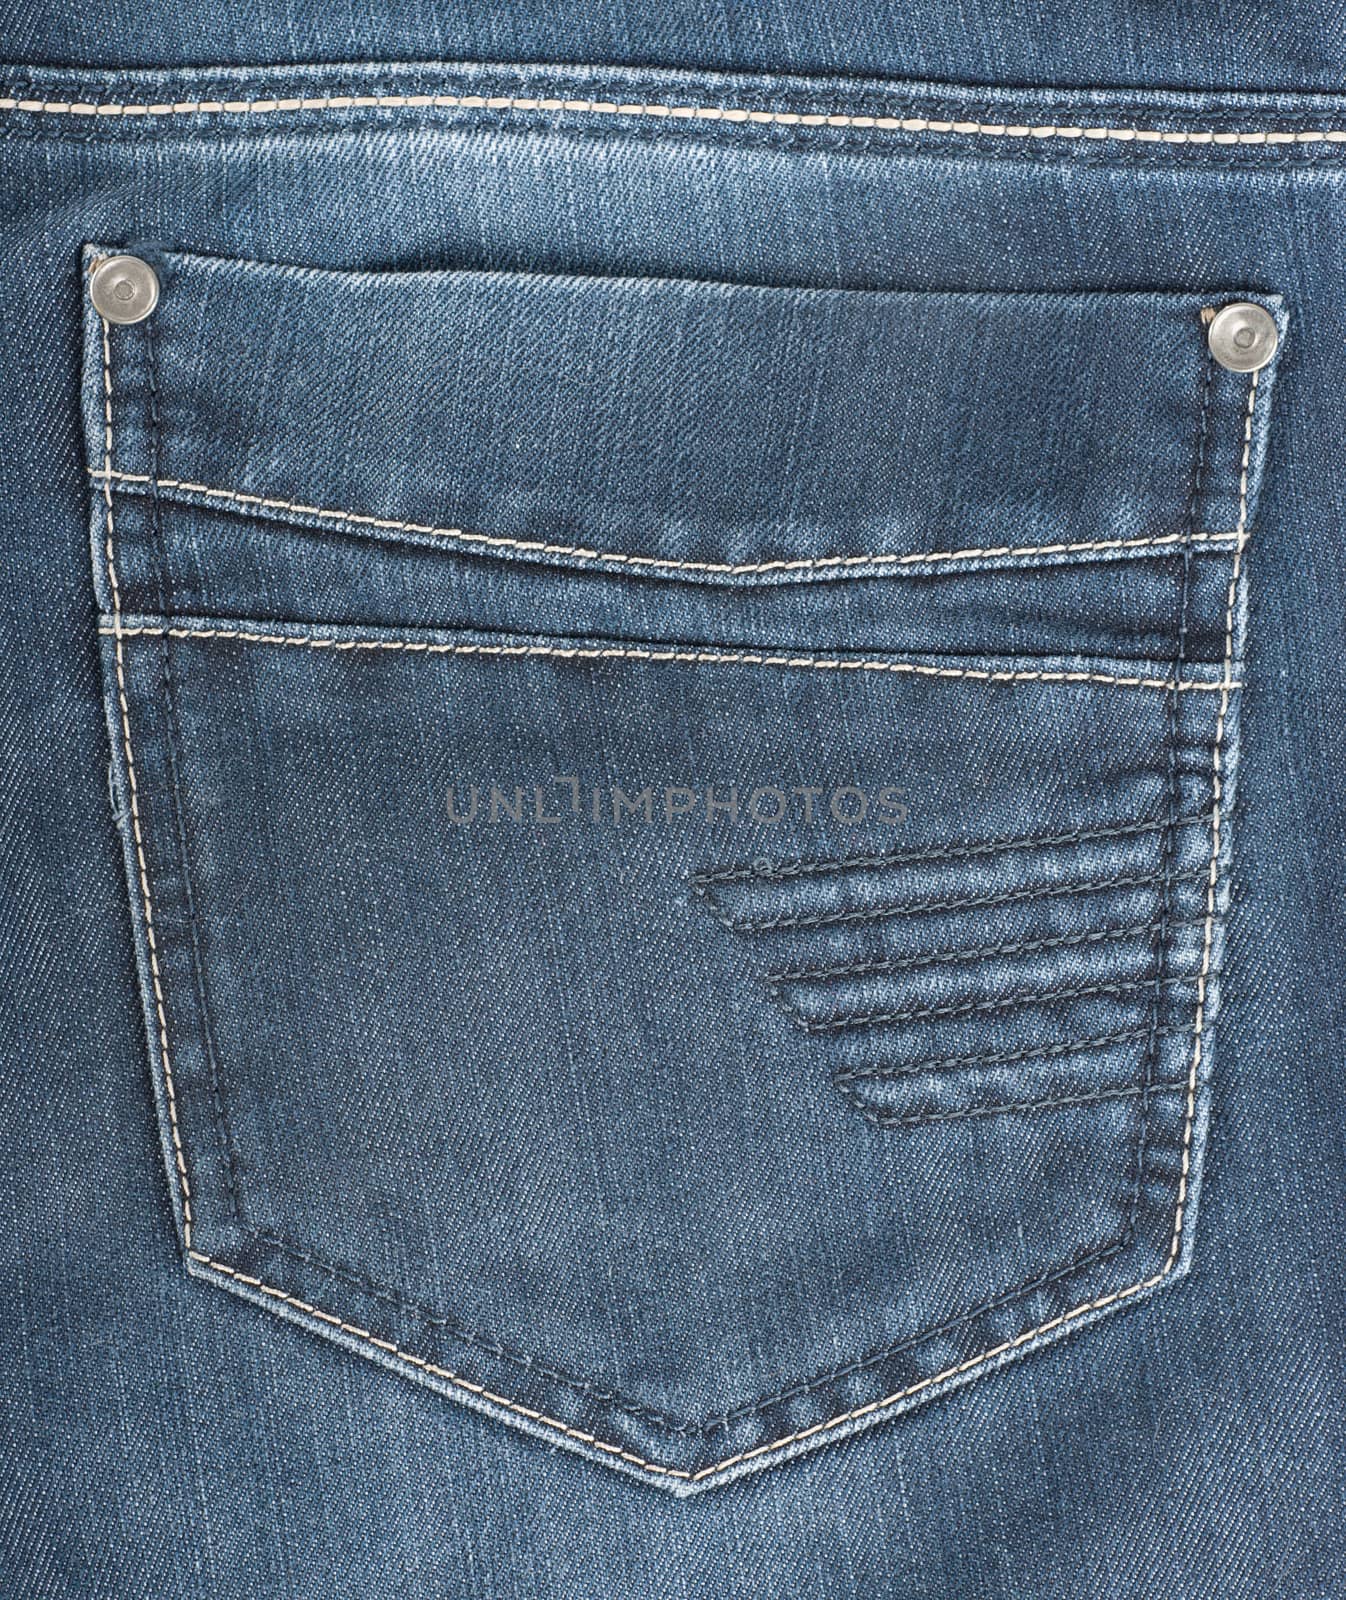 Pocket jeans by Givaga